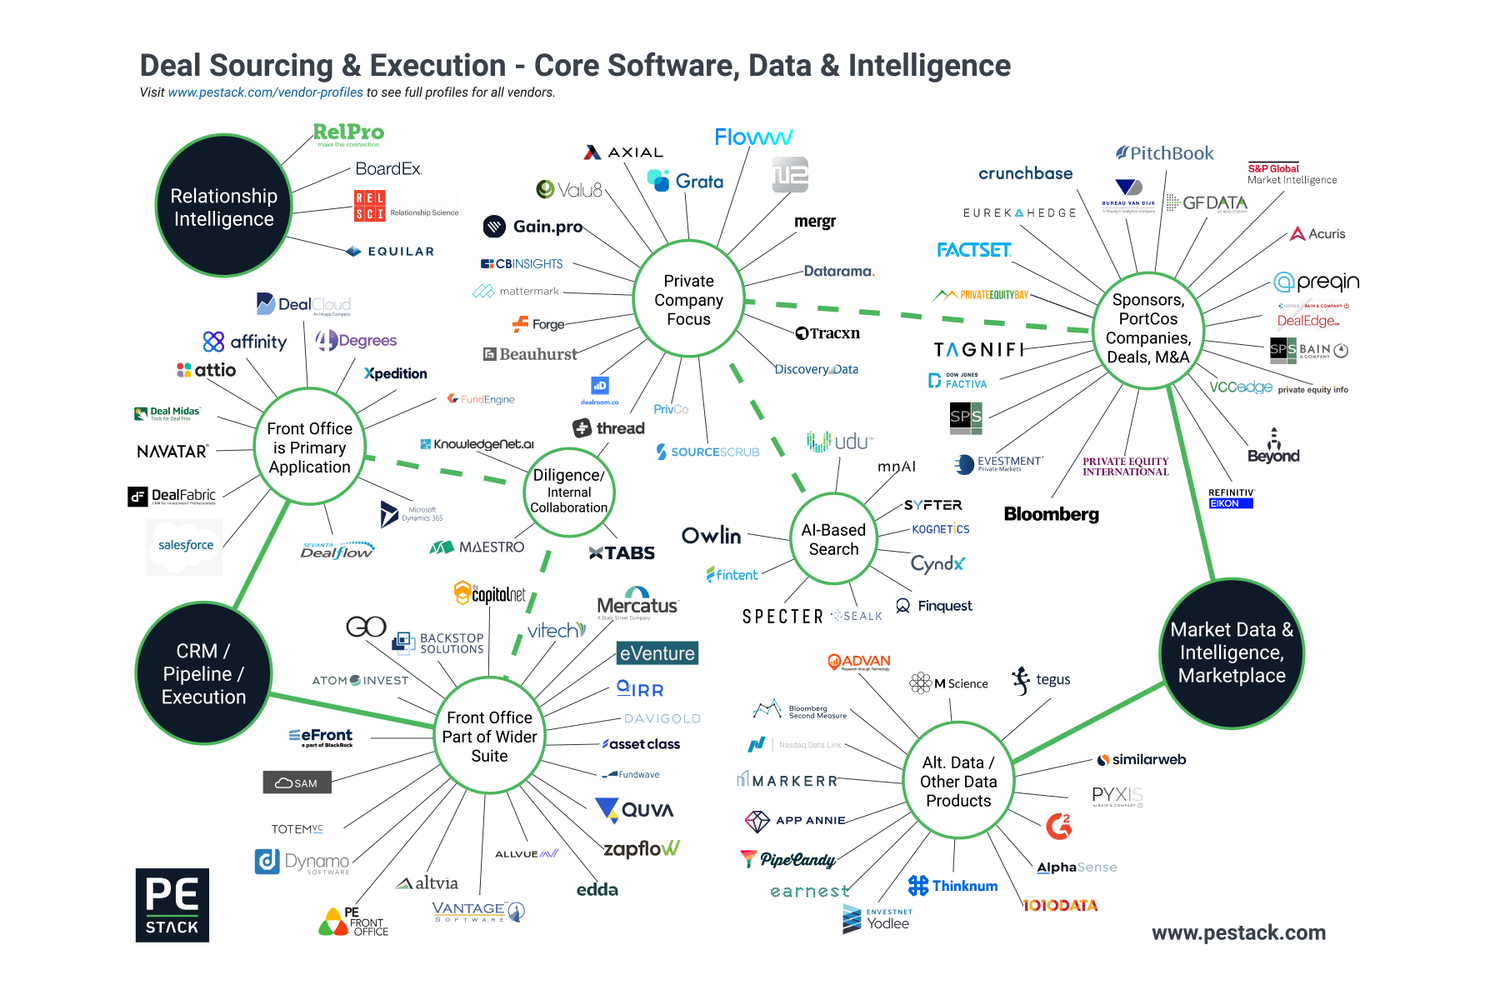 Deal Sourcing & Execution - Core Software, Data & Intelligence